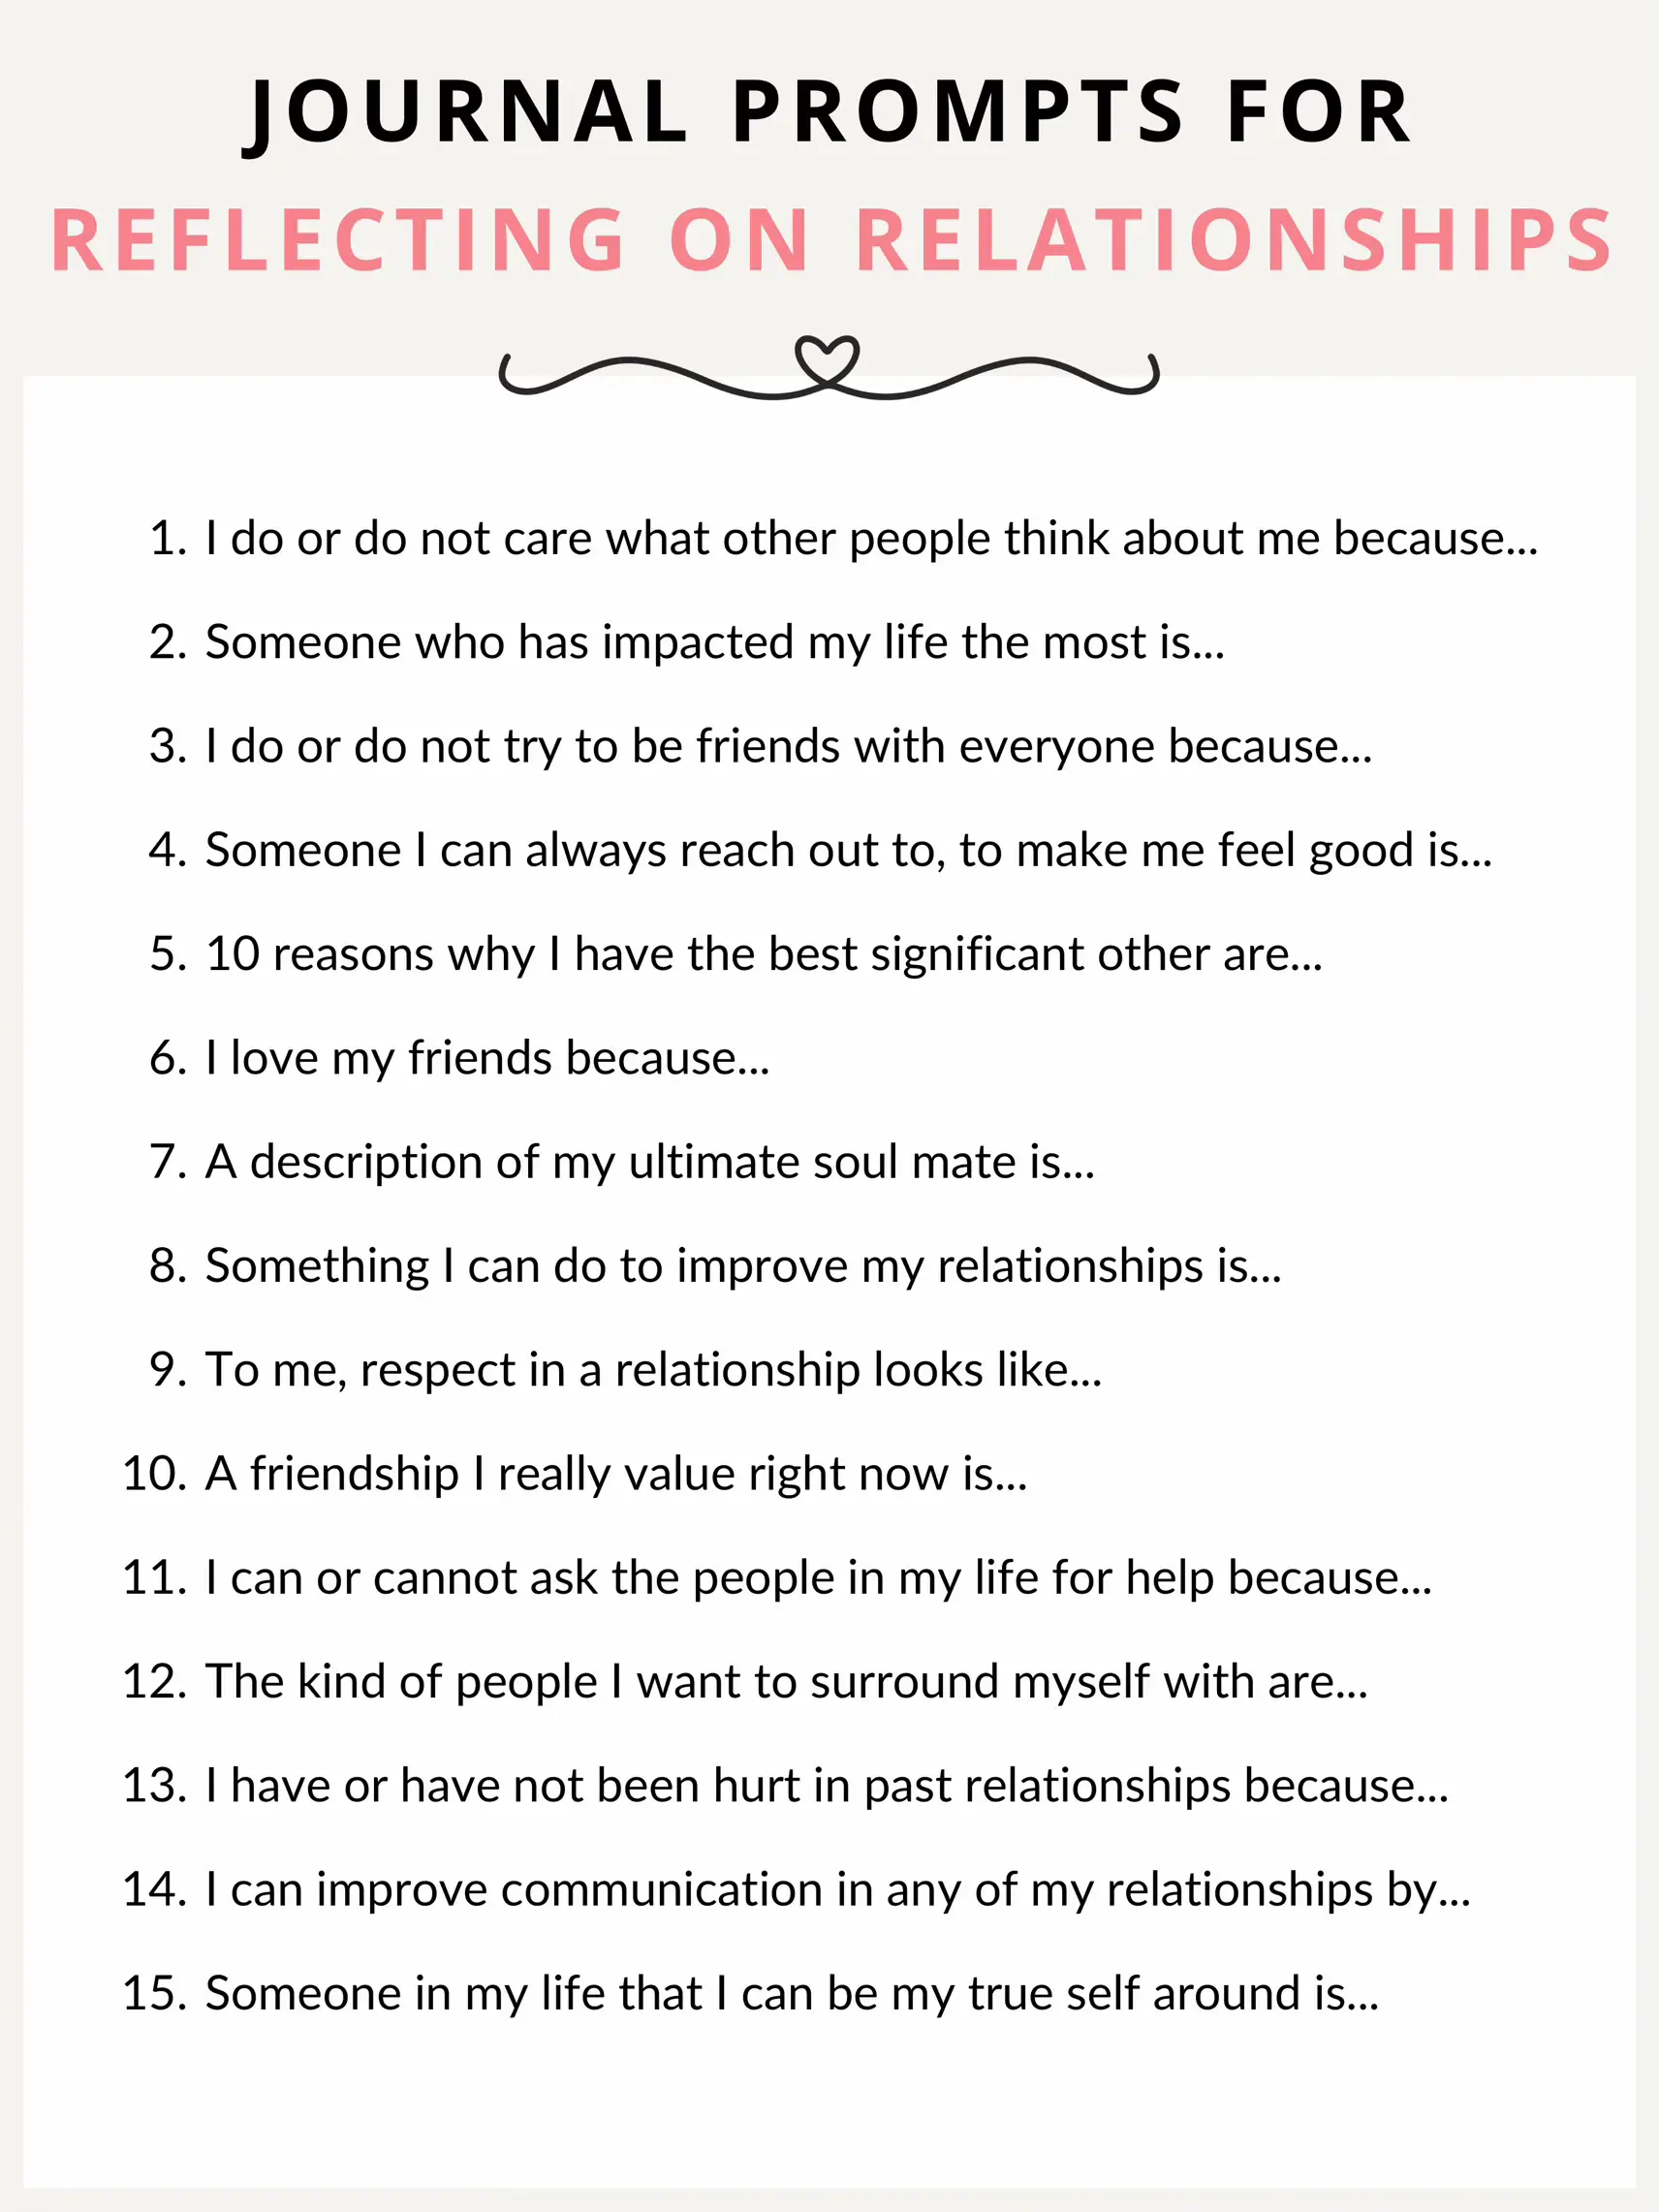 47 Relationship Journal Prompts to Unlock Greater Love